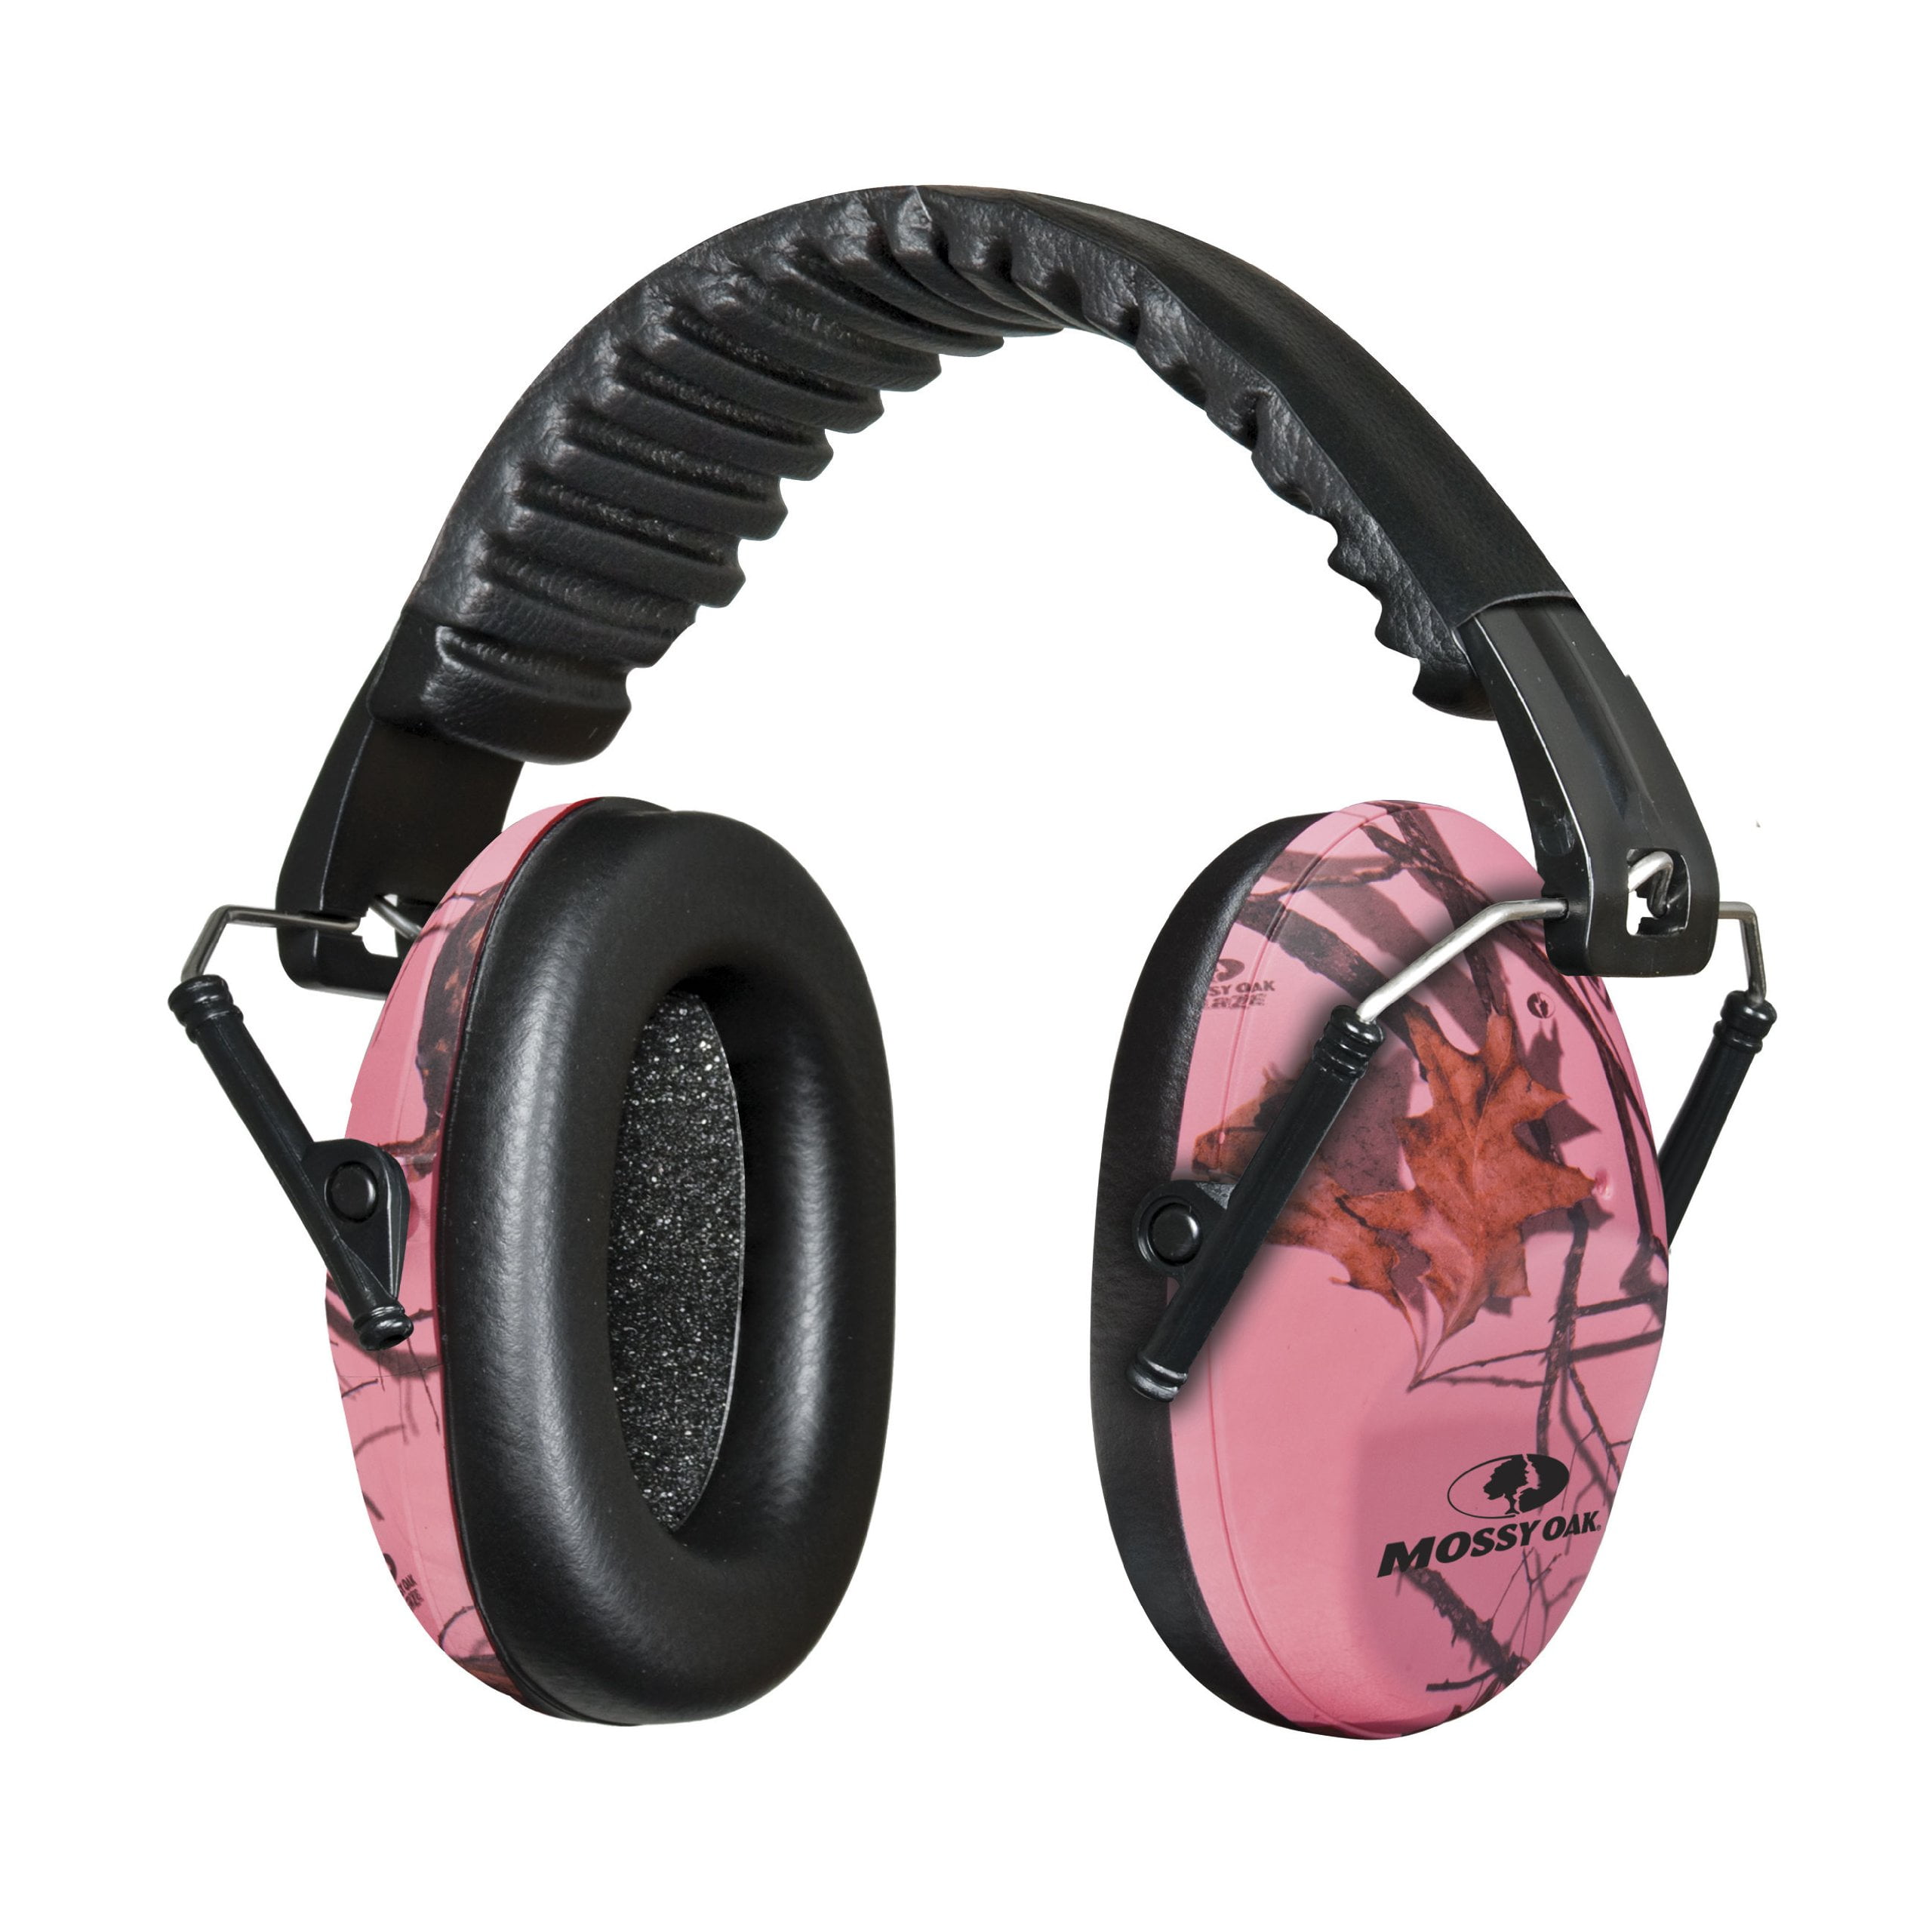 2Pcs Anti-noise Earmuffs Tactical Shooting Ear Protector Black/Red+Pink 